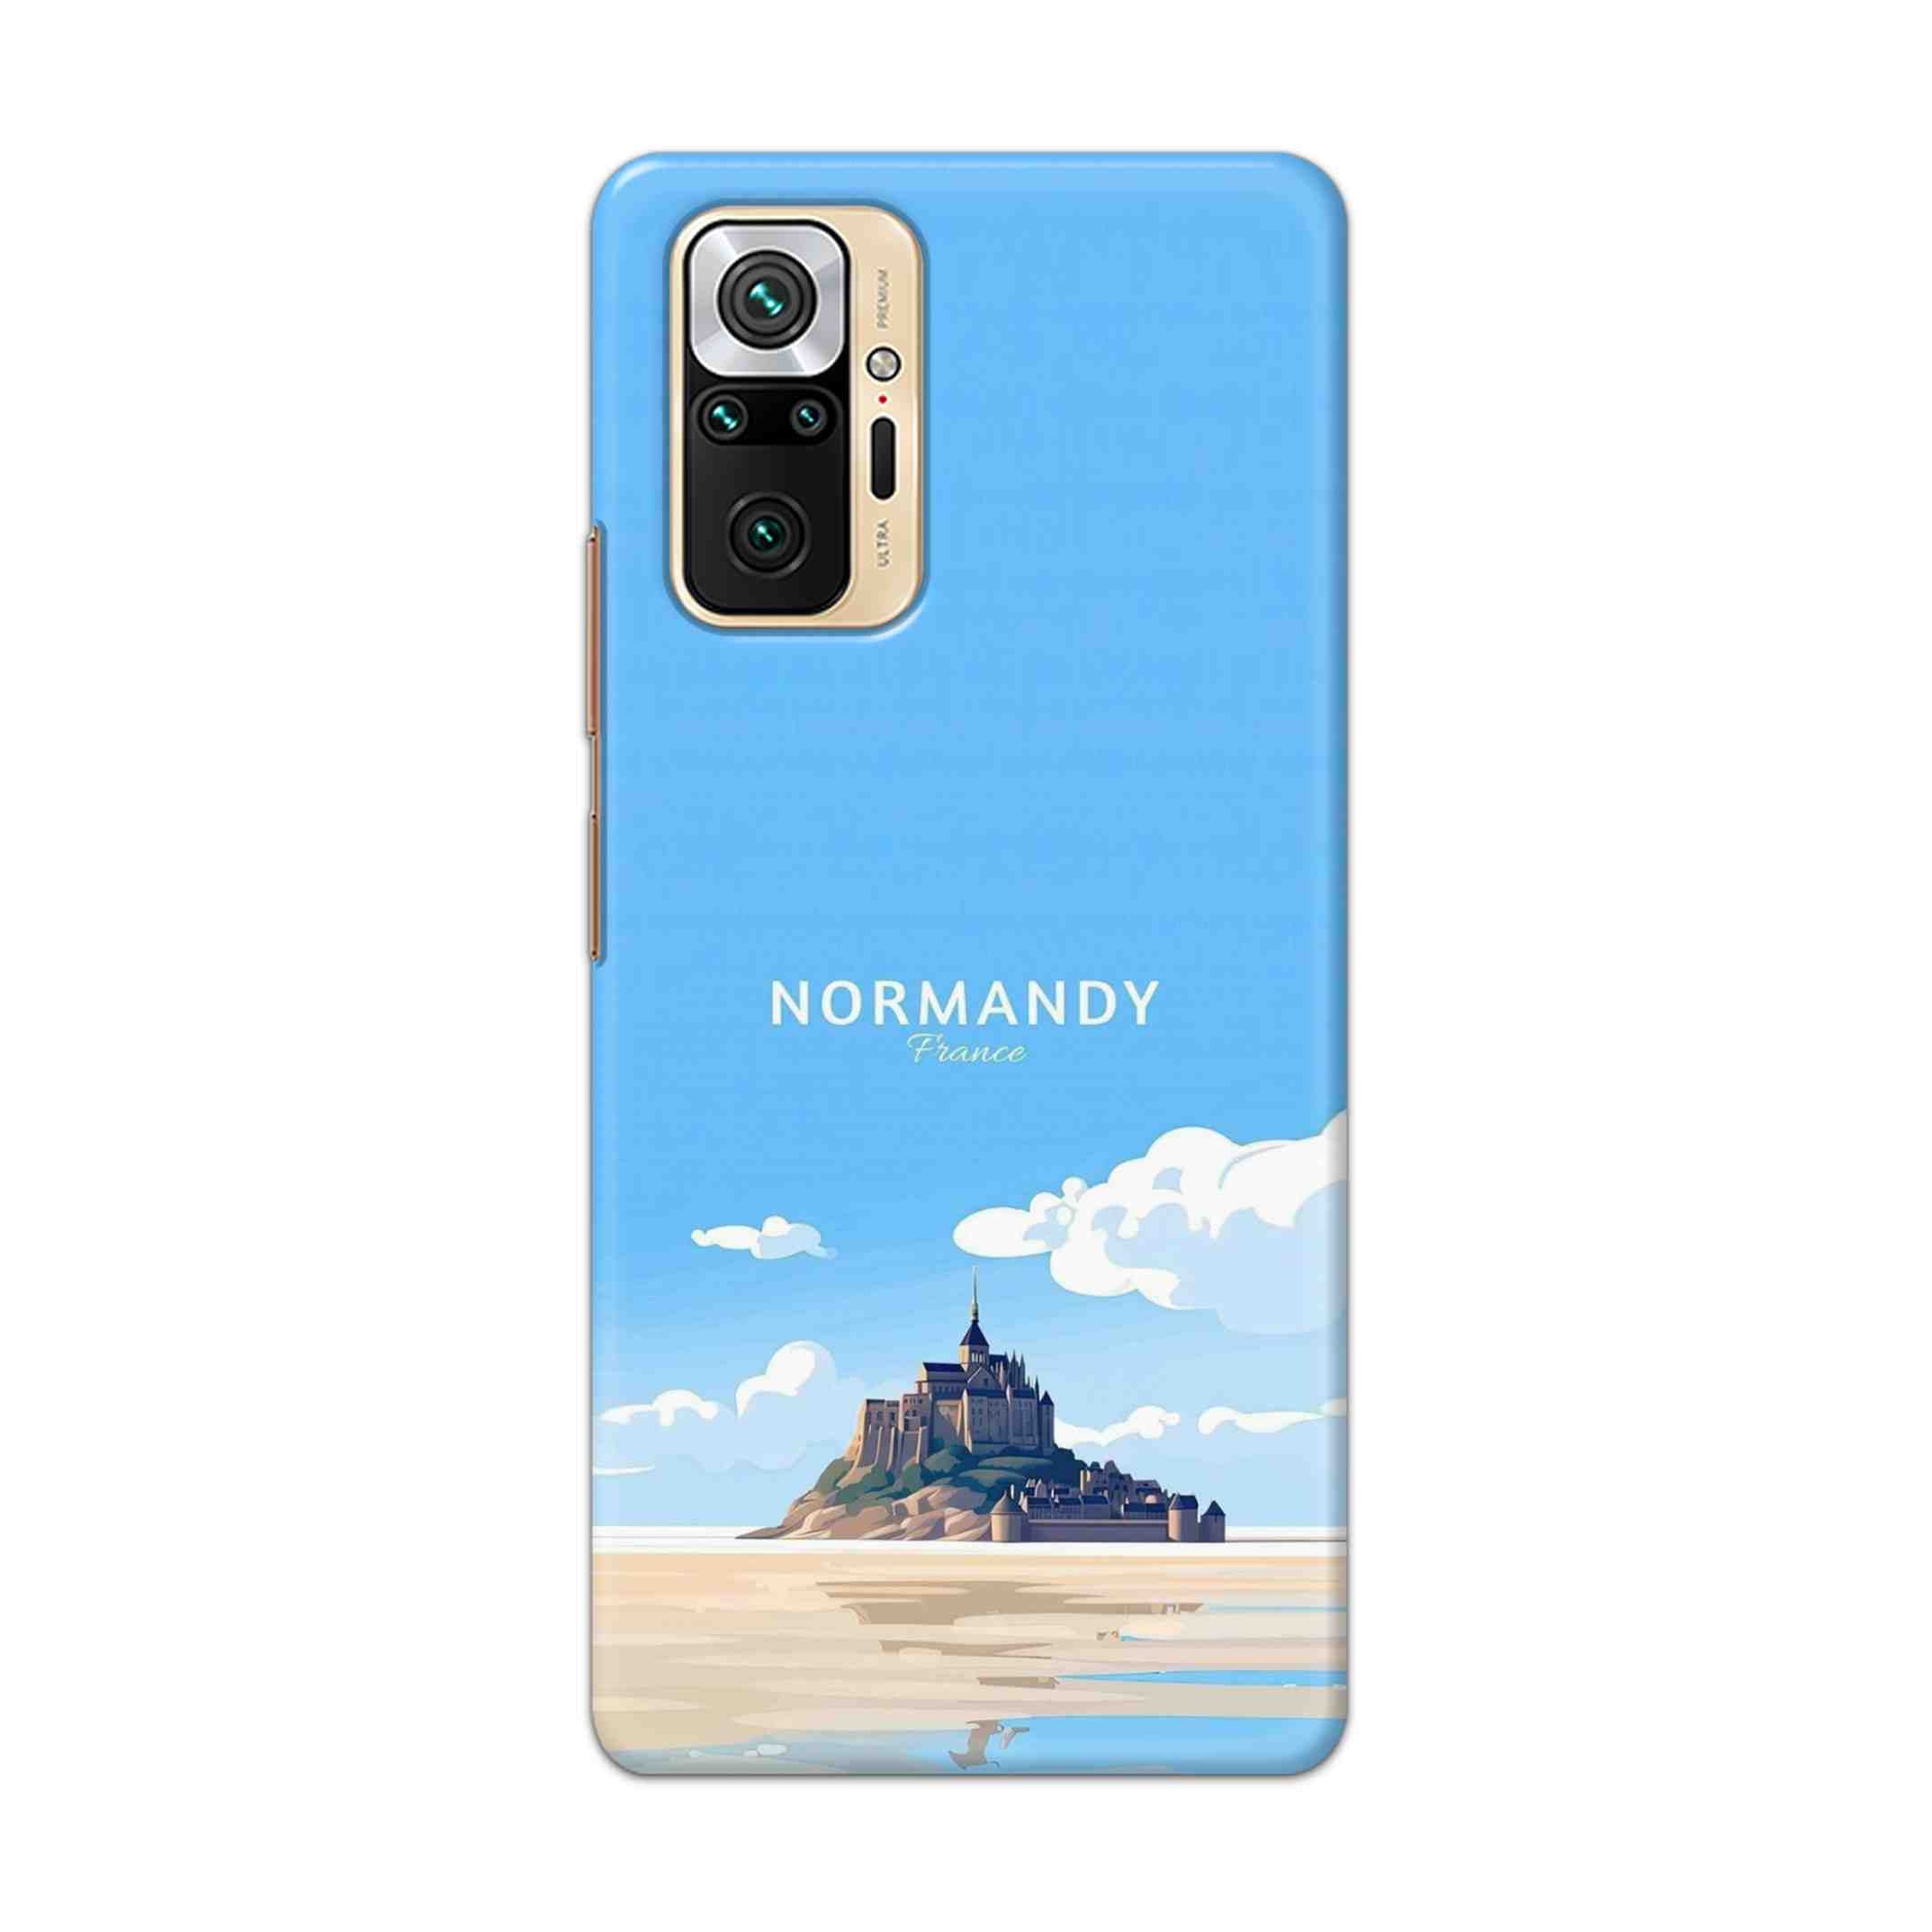 Buy Normandy Hard Back Mobile Phone Case Cover For Redmi Note 10 Pro Online